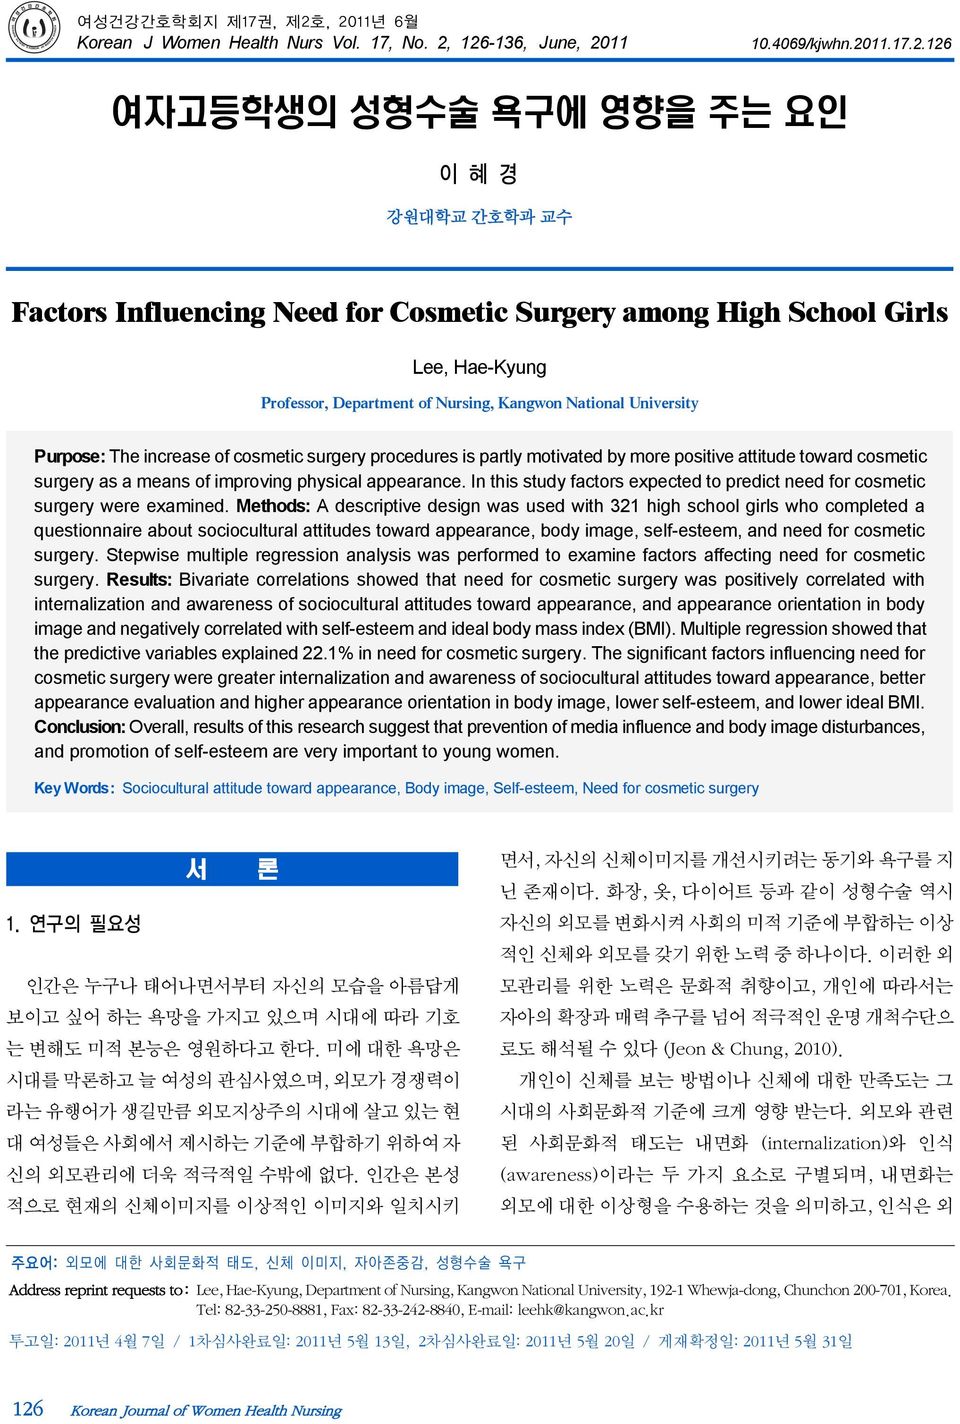 High School Girls Lee, Hae-Kyung Professor, Department of Nursing, Kangwon National University Purpose: The increase of cosmetic surgery procedures is partly motivated by more positive attitude